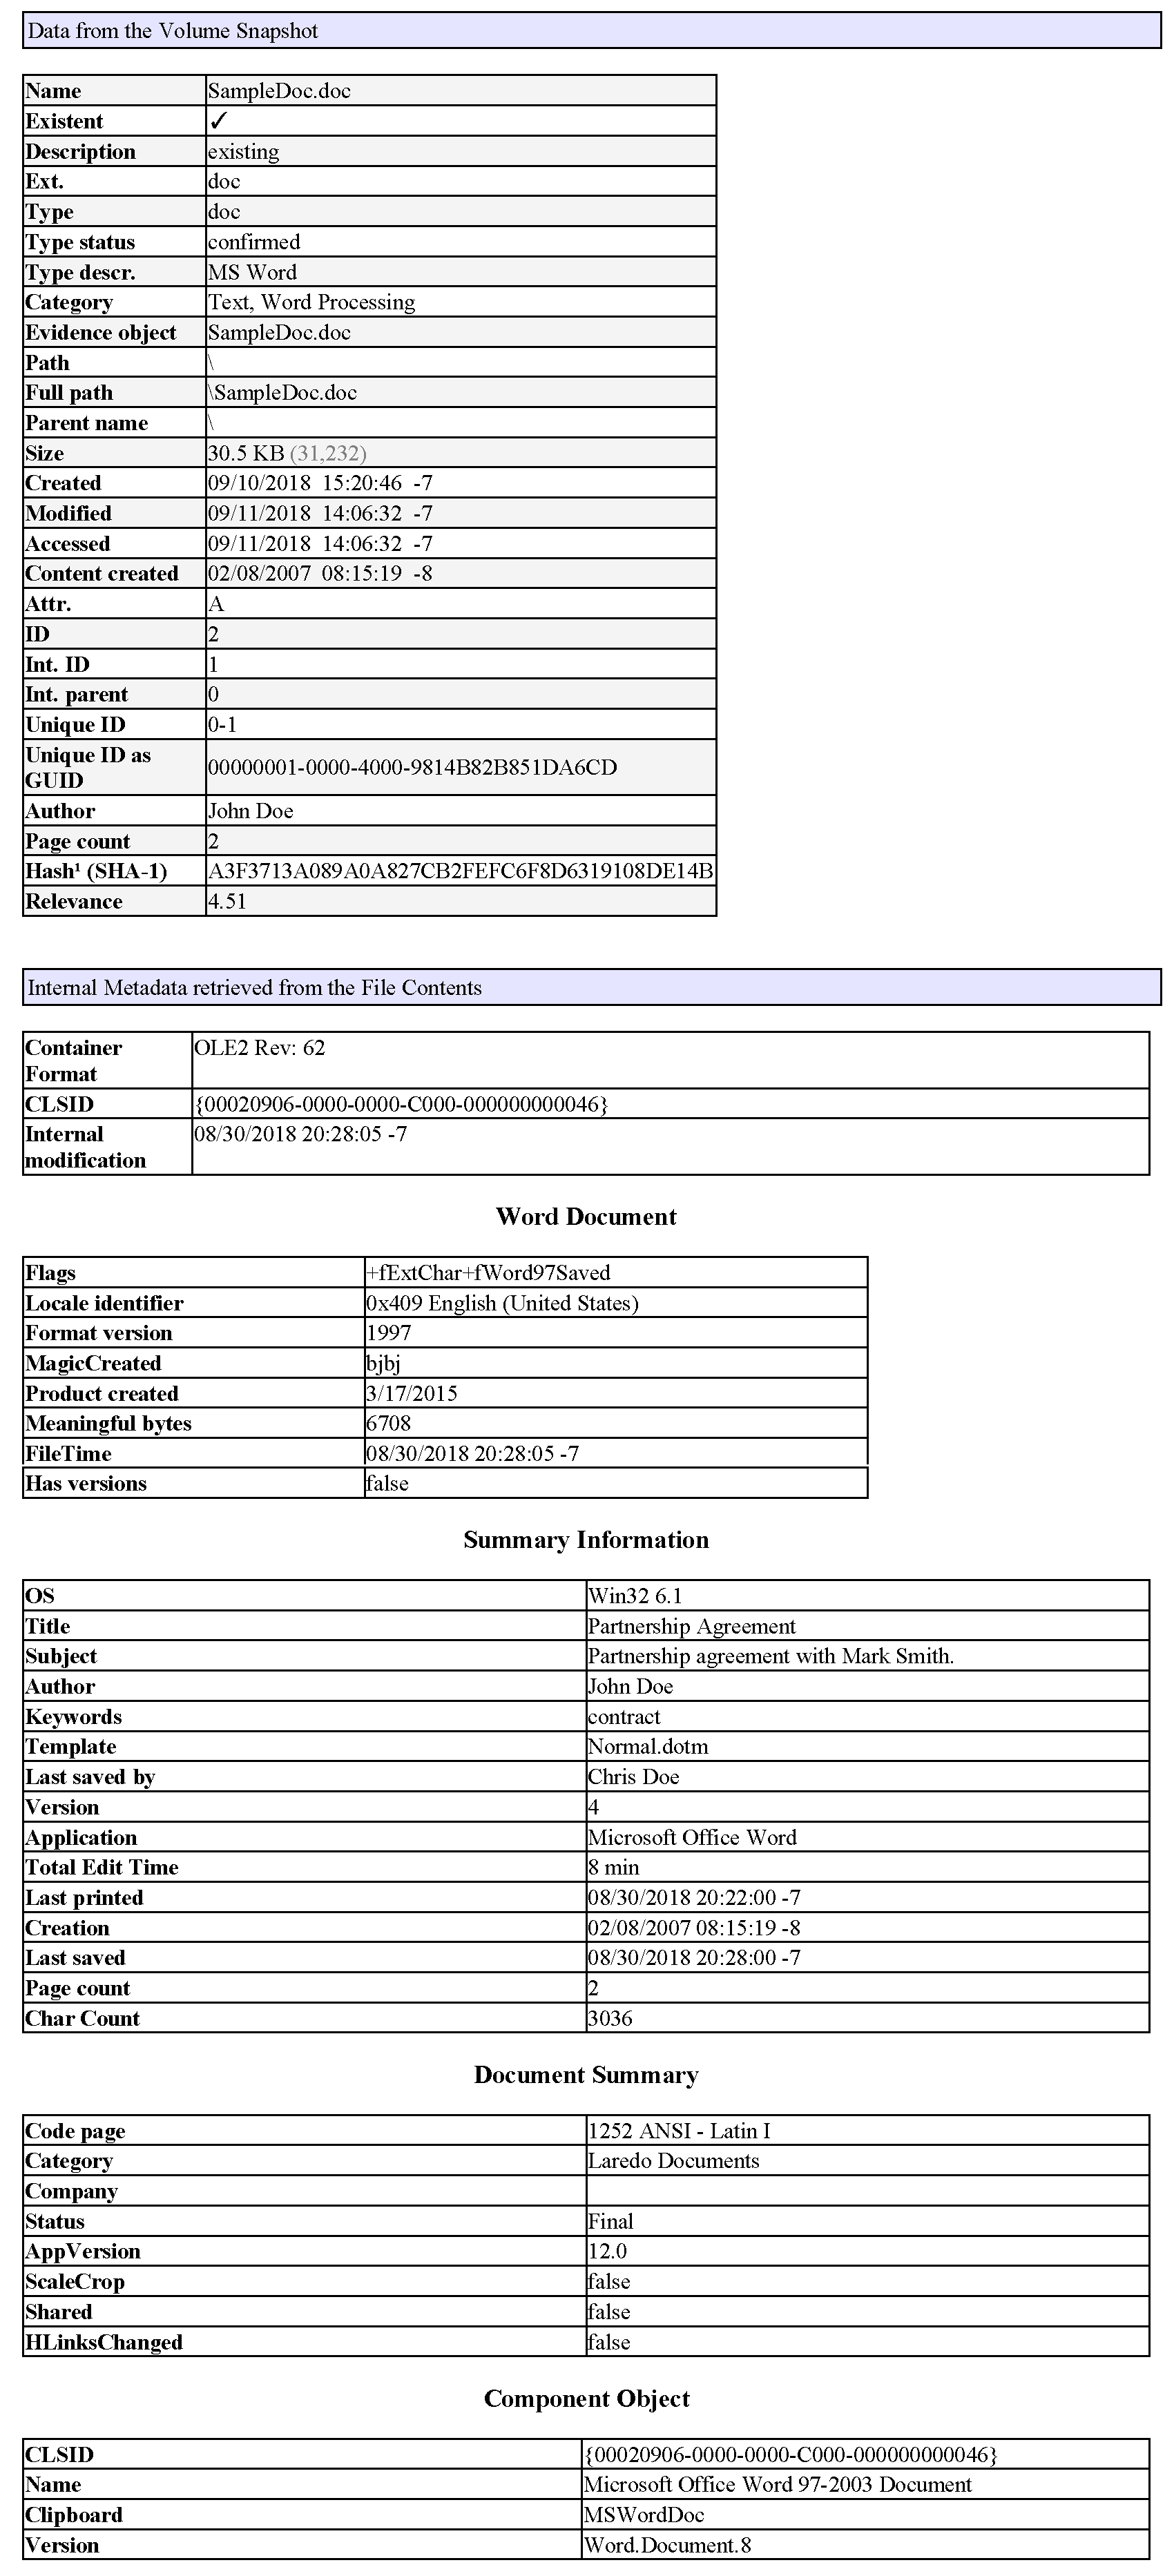 Digital Forensics Report Template from www.forensicfocus.com